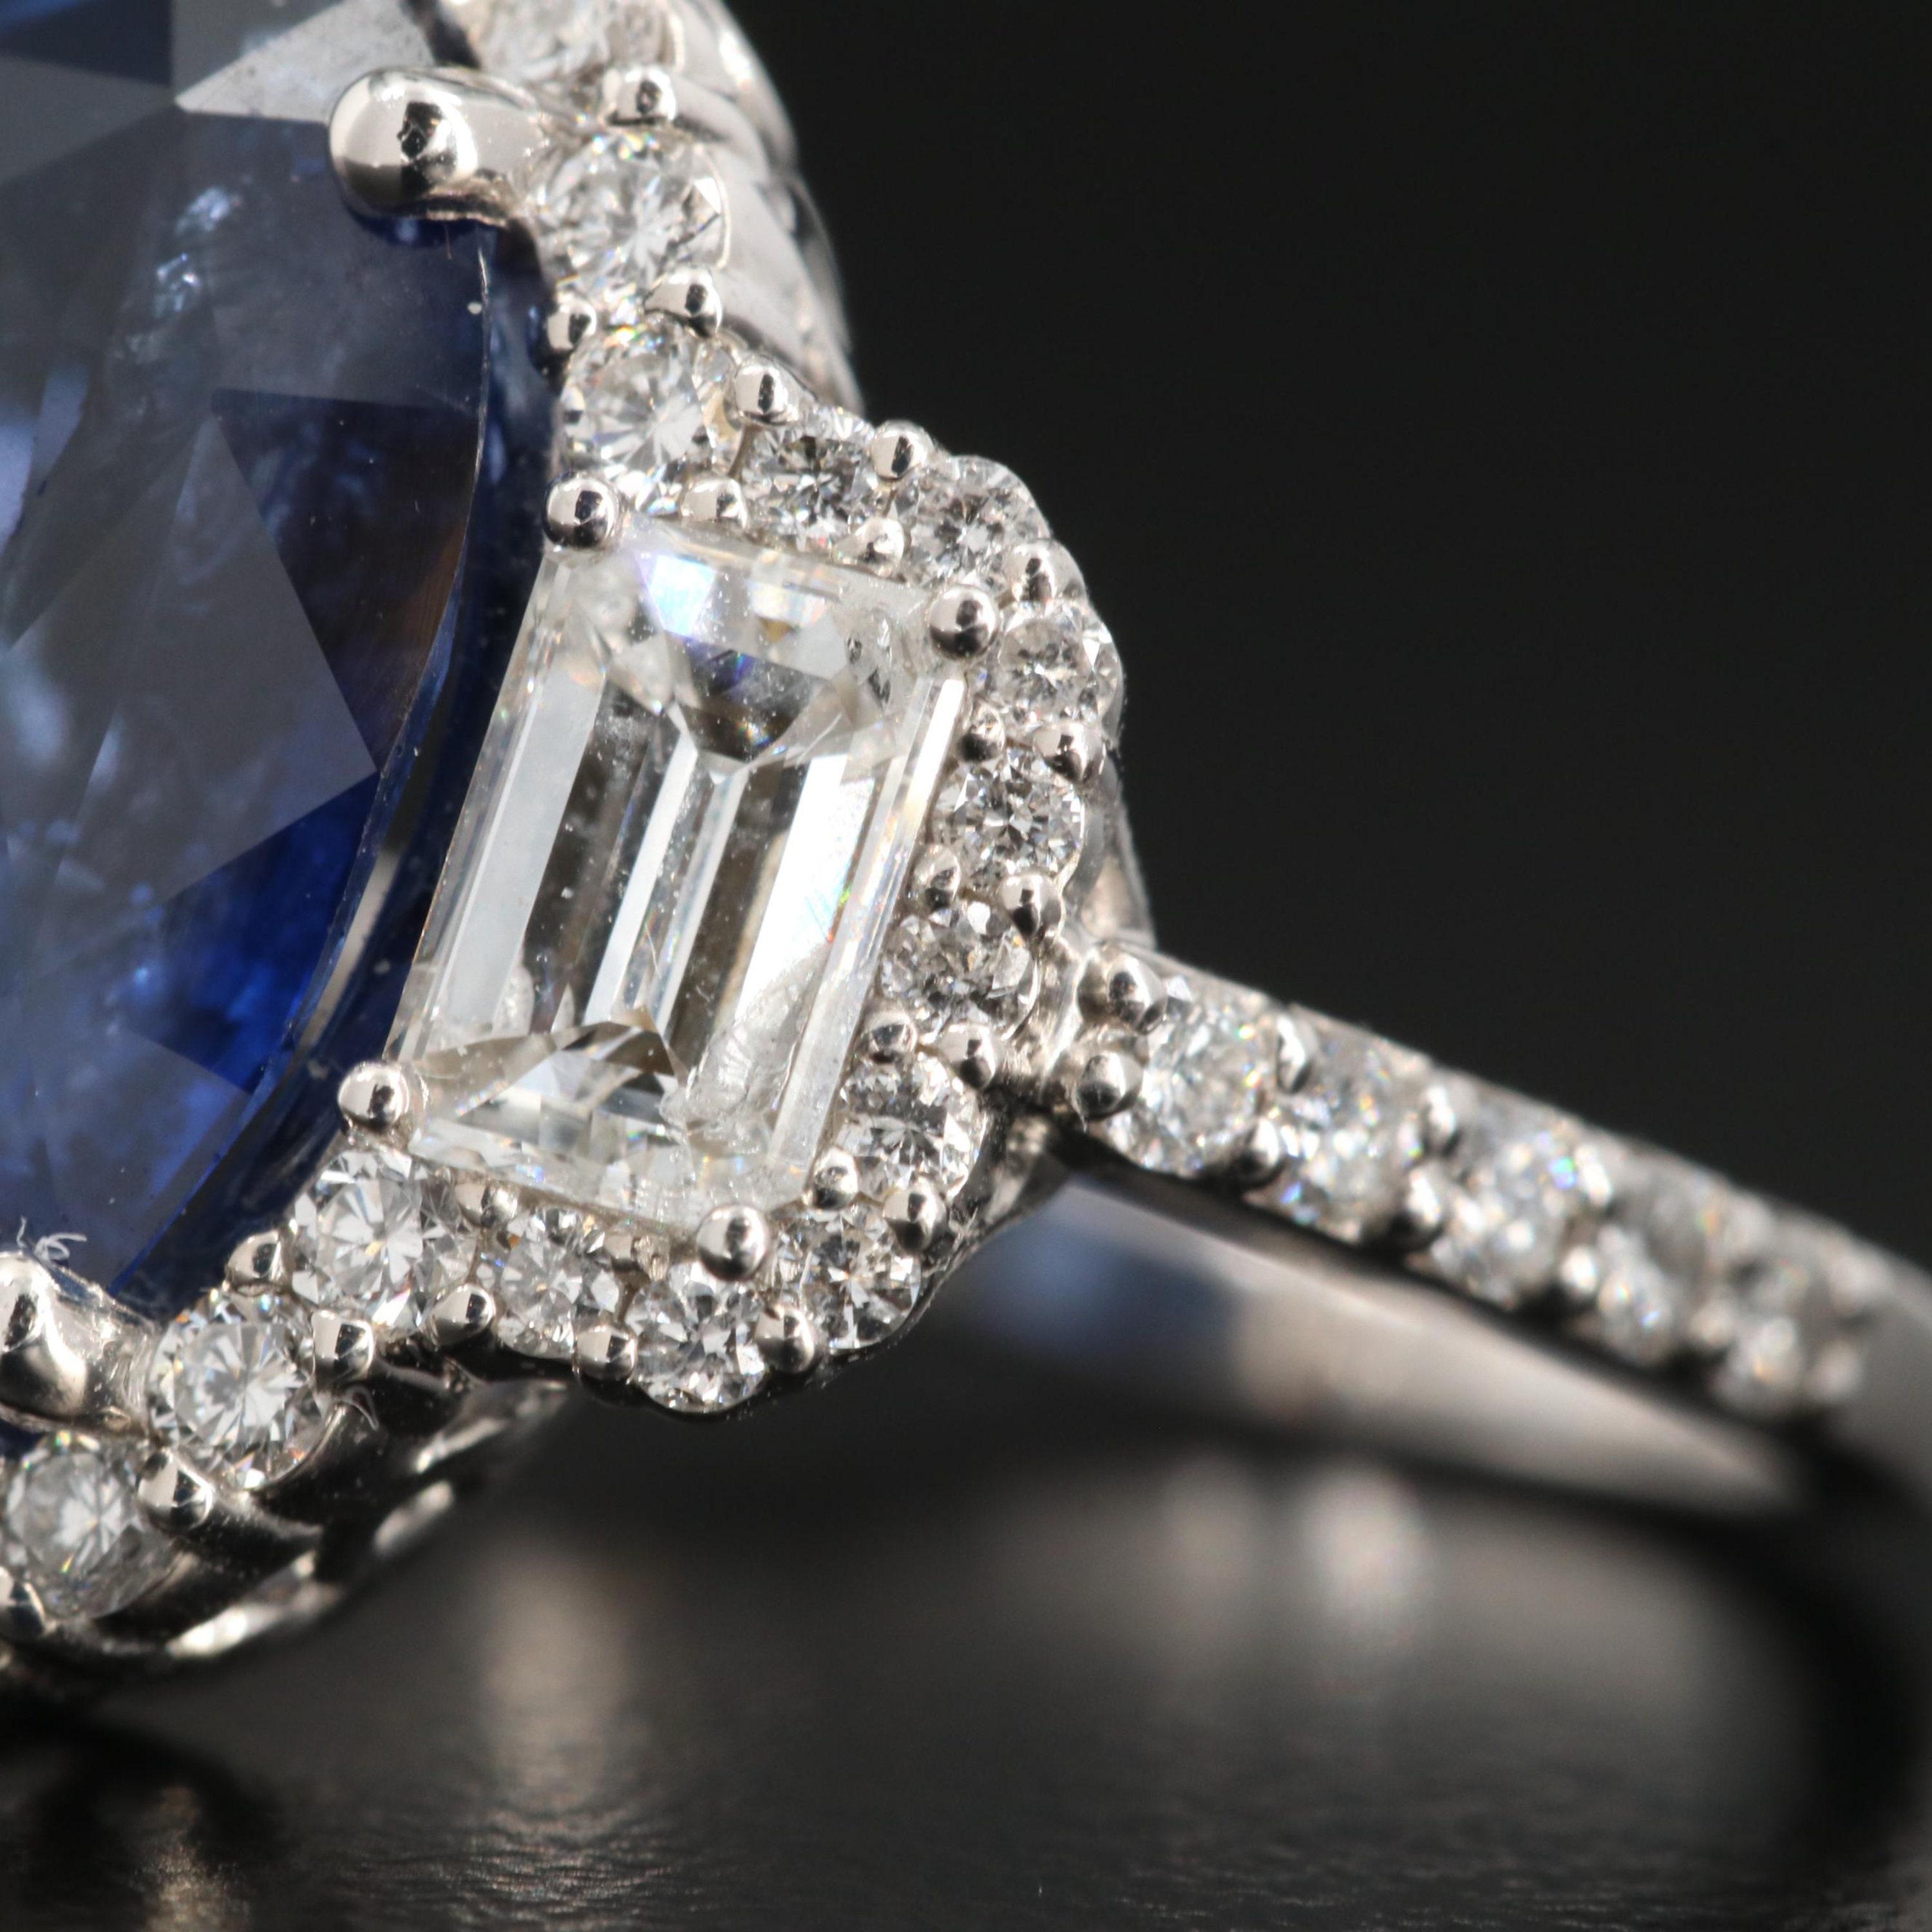 For Sale:  5 Carat Natural Sapphire Diamond Engagement Ring Set in 18K Gold, Cocktail Ring 3